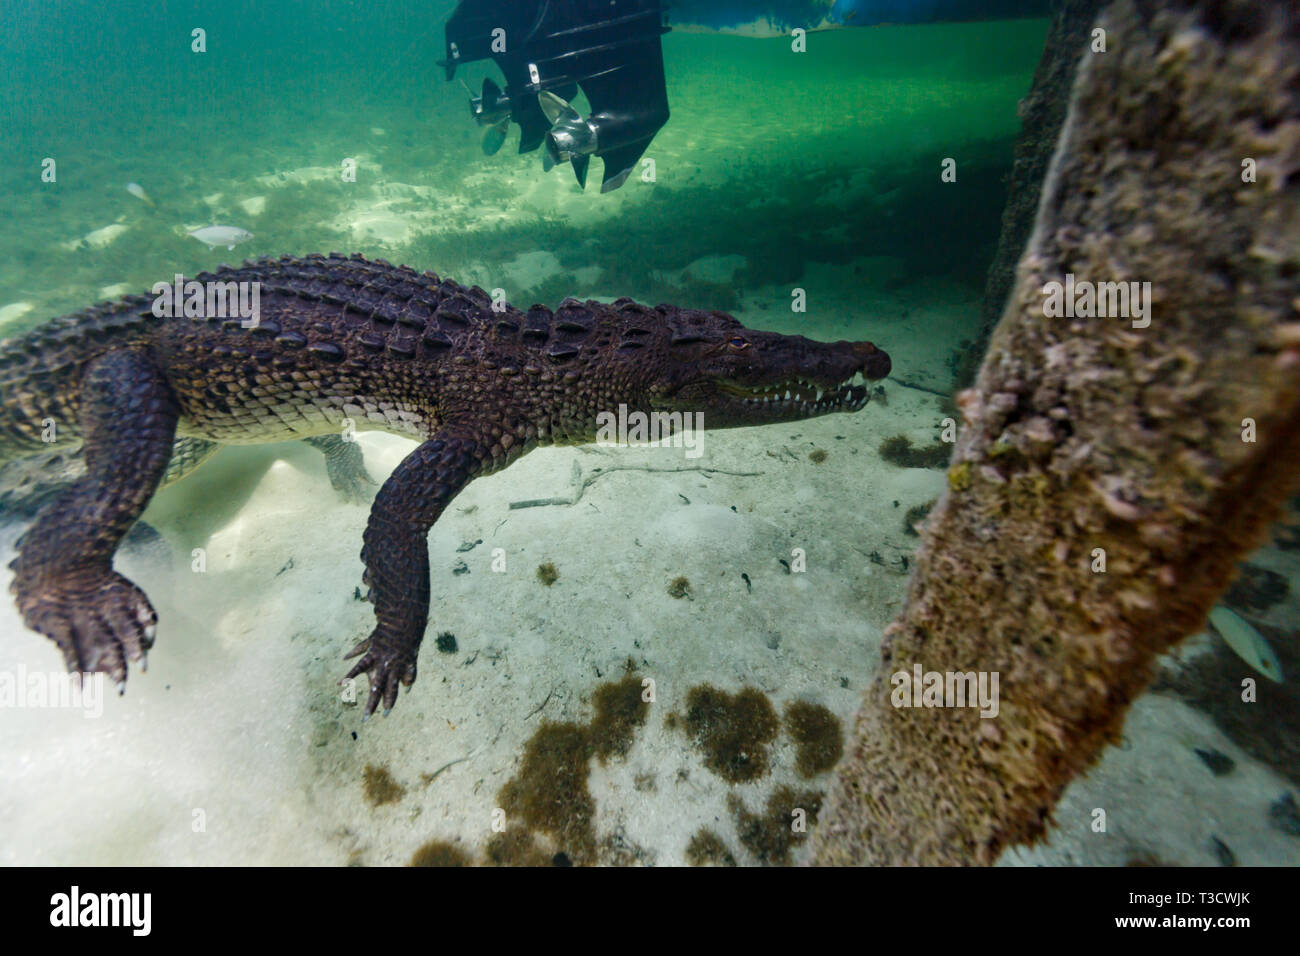 Top down closeup of an American crocodile, Crocodylus acutus, jaw open, underwater, tail swishing, swimming up from the ocean floor by the dock Stock Photo